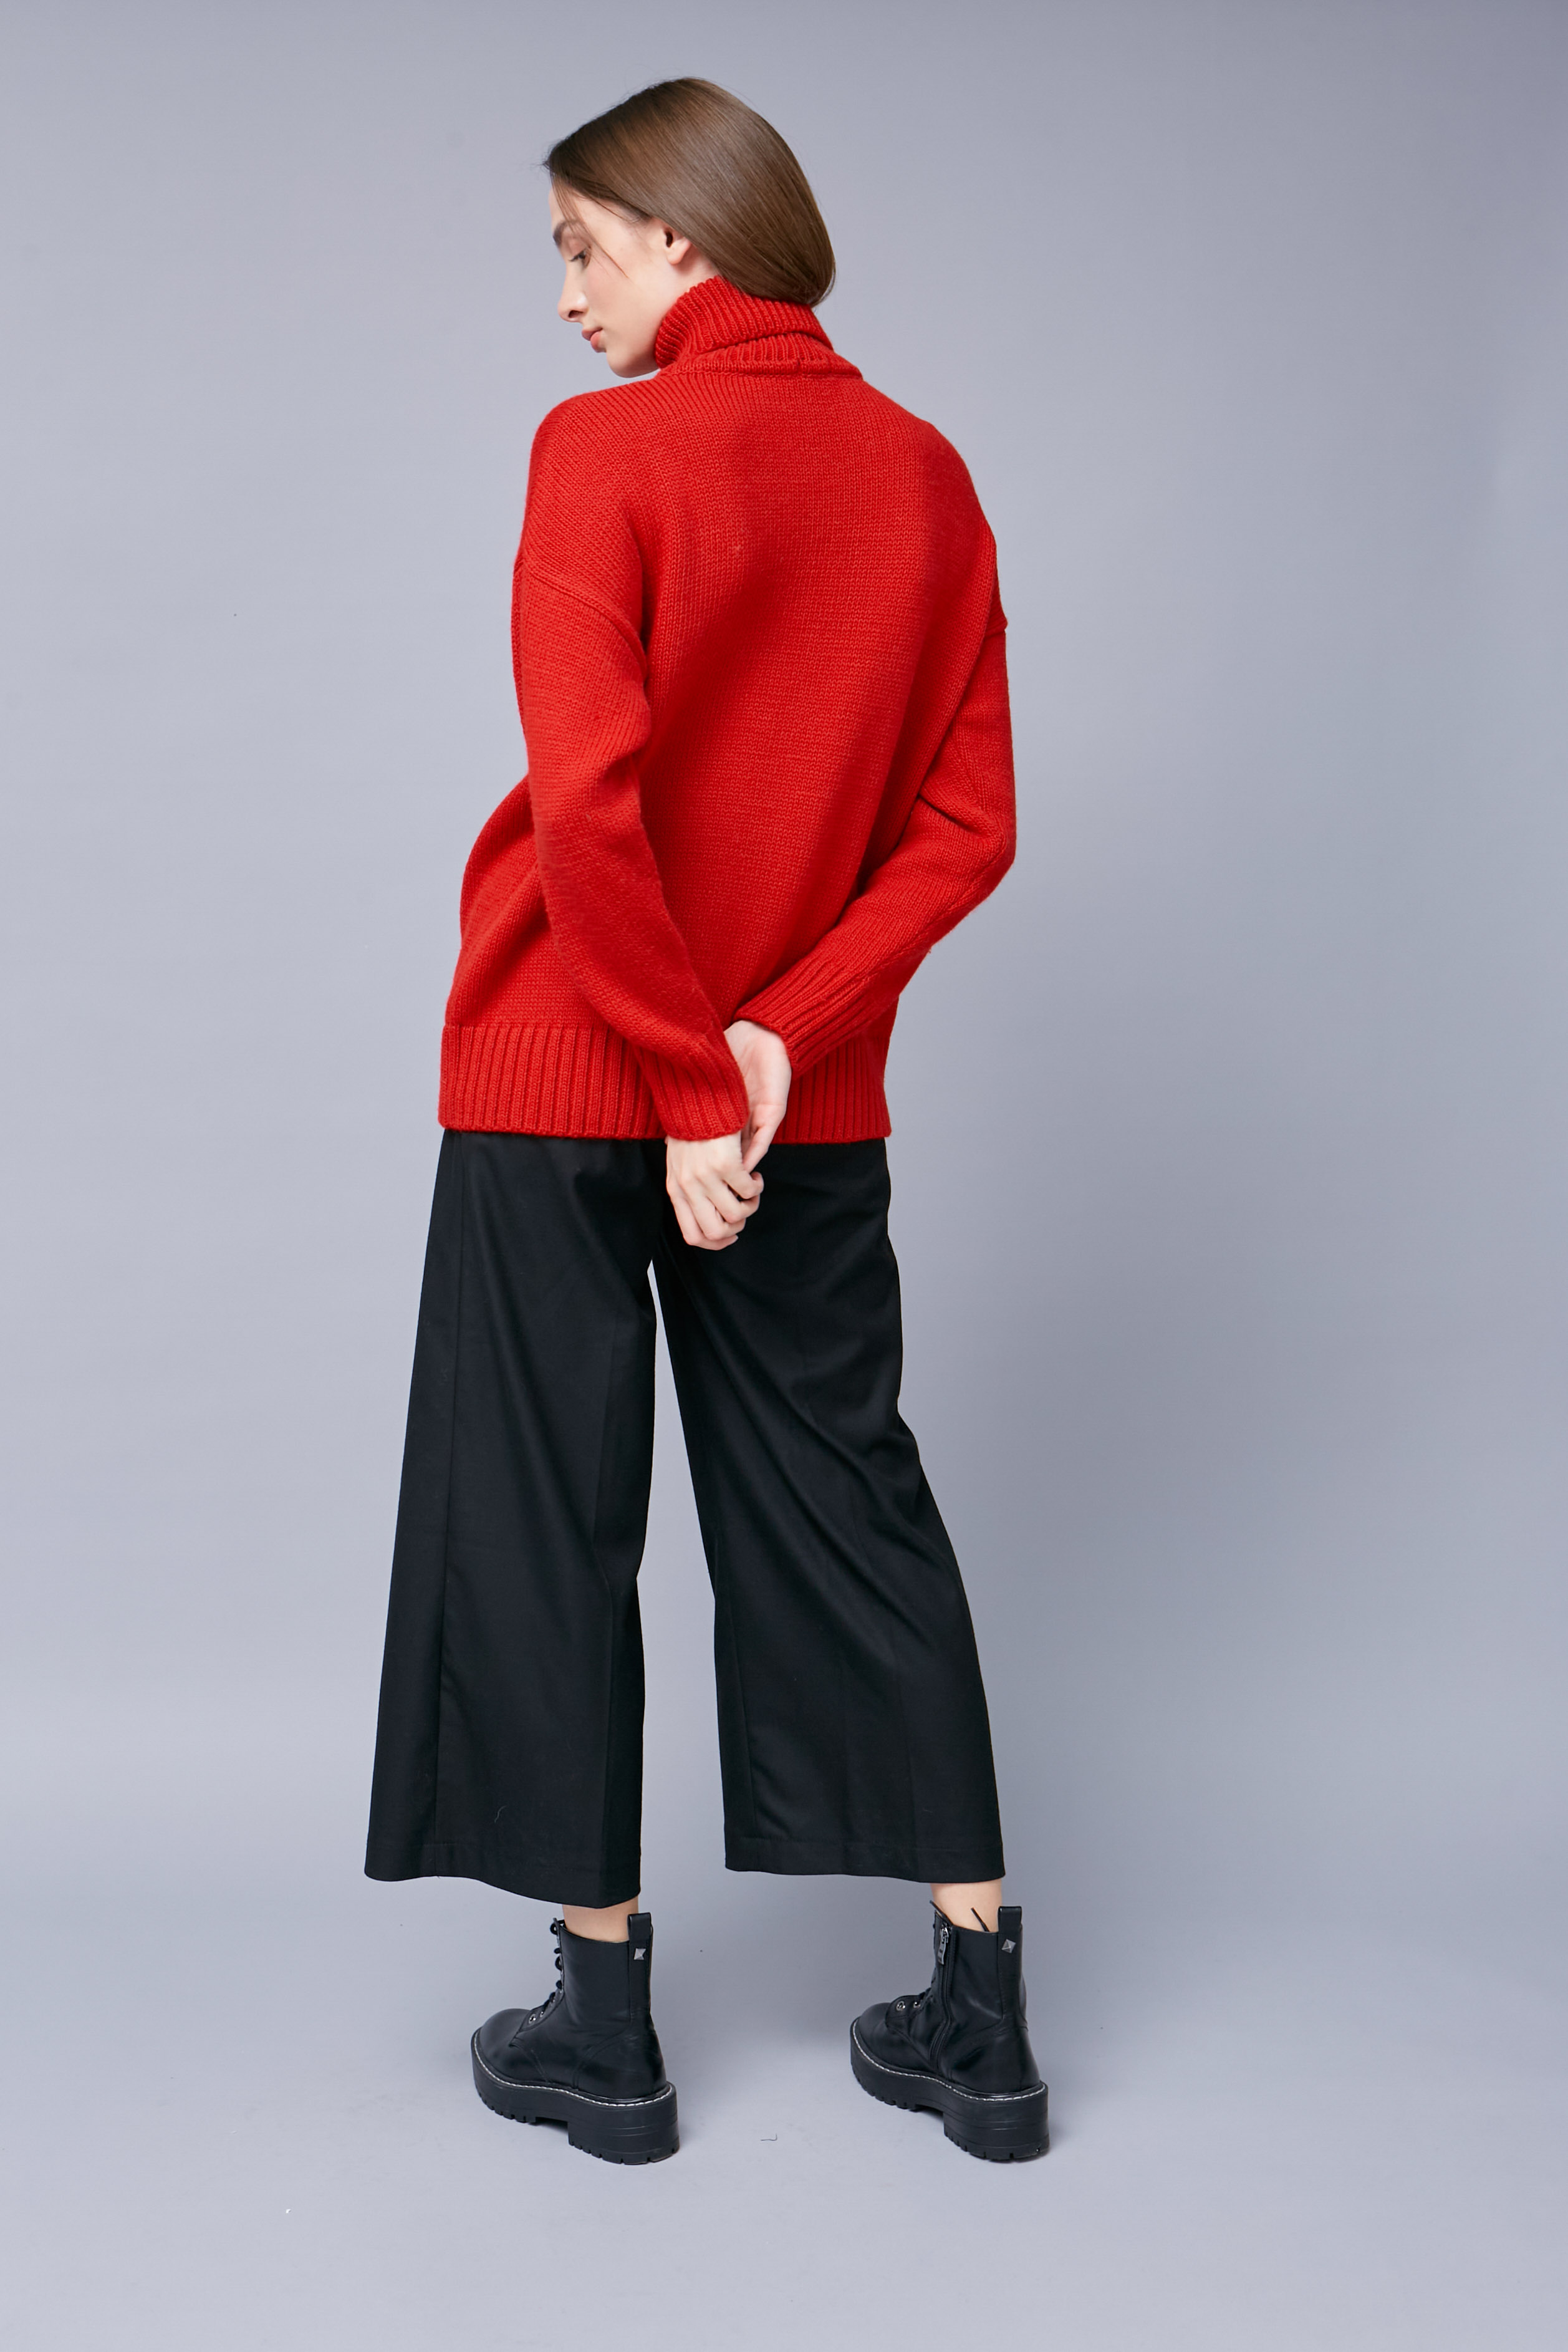 Red knit turtleneck sweater, photo 4